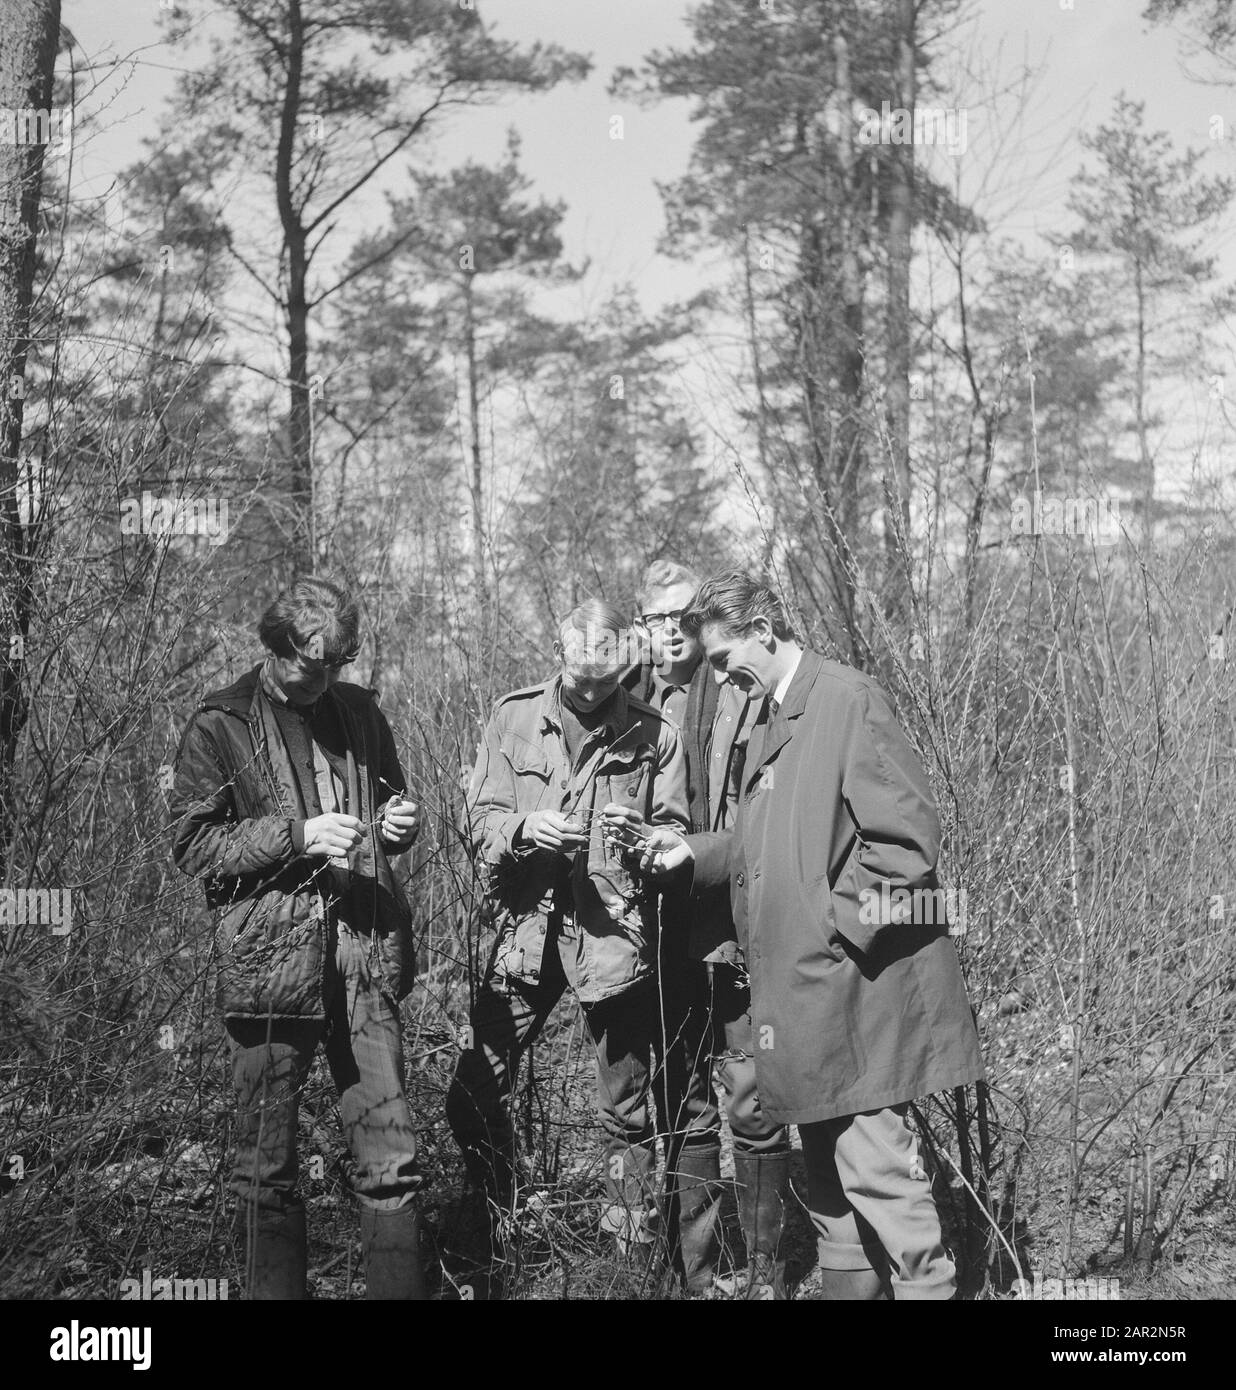 men, forests, conversations, viewing Date: undated Keywords: view, forests, conversations, men Stock Photo